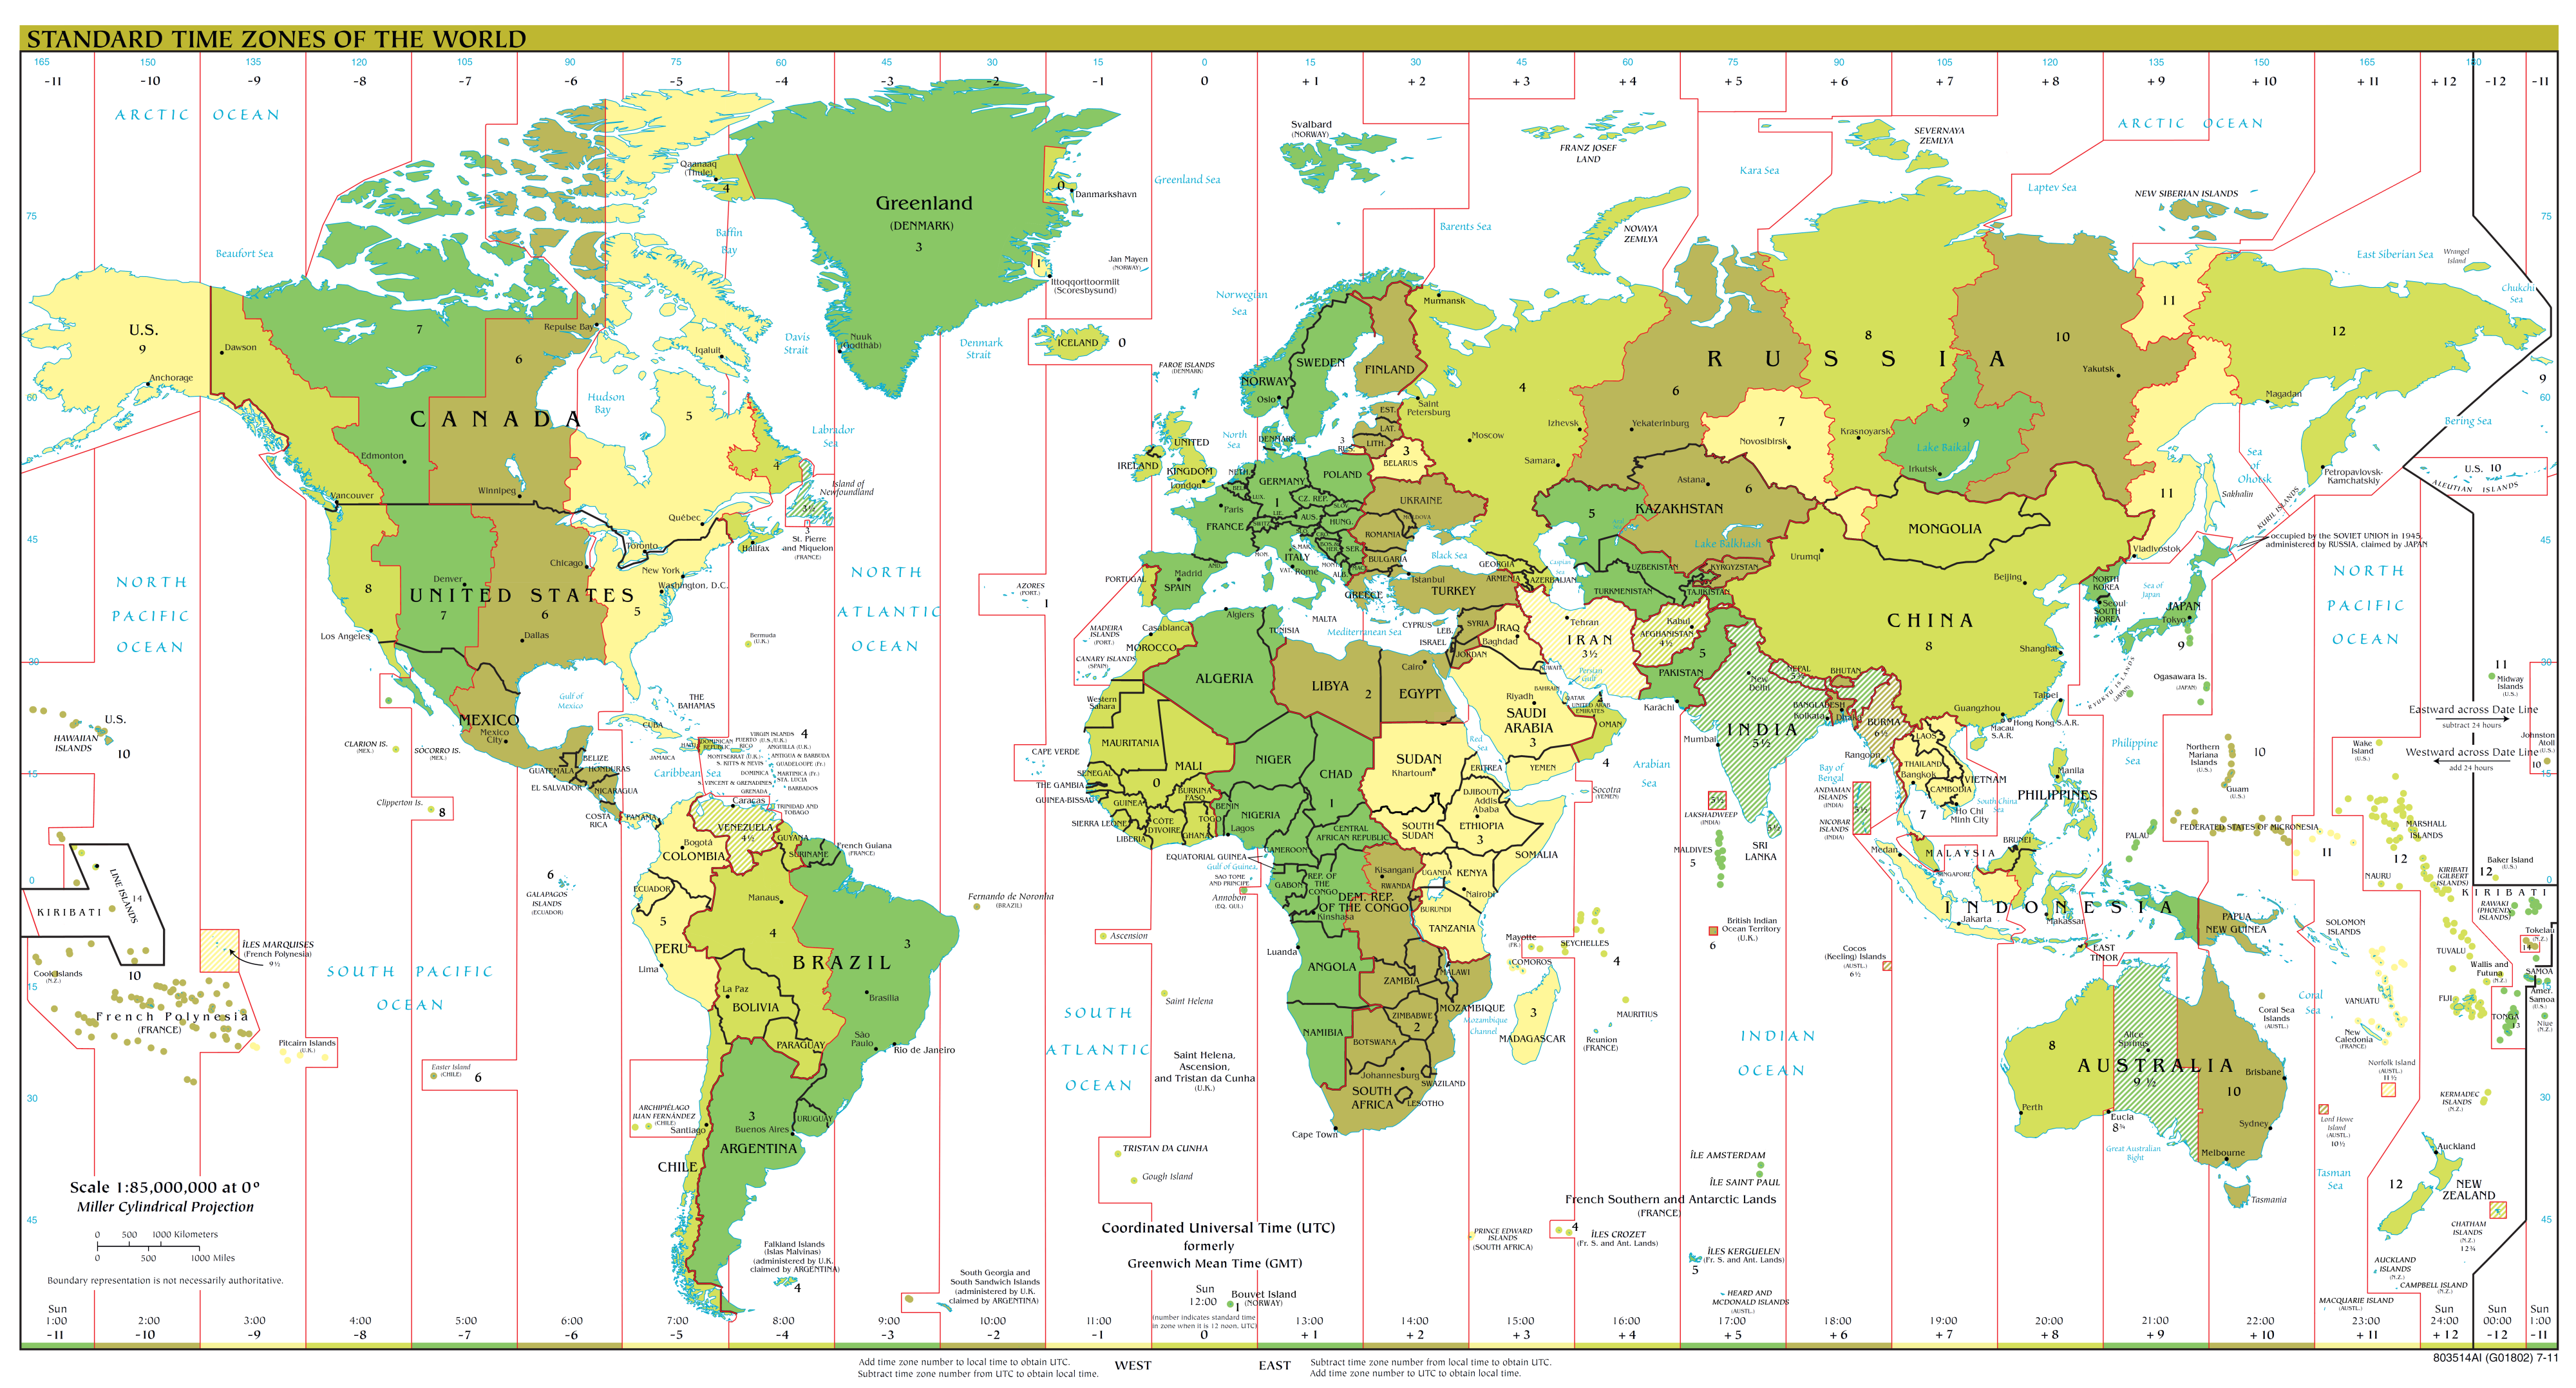 A map showing all continents and the different time zones